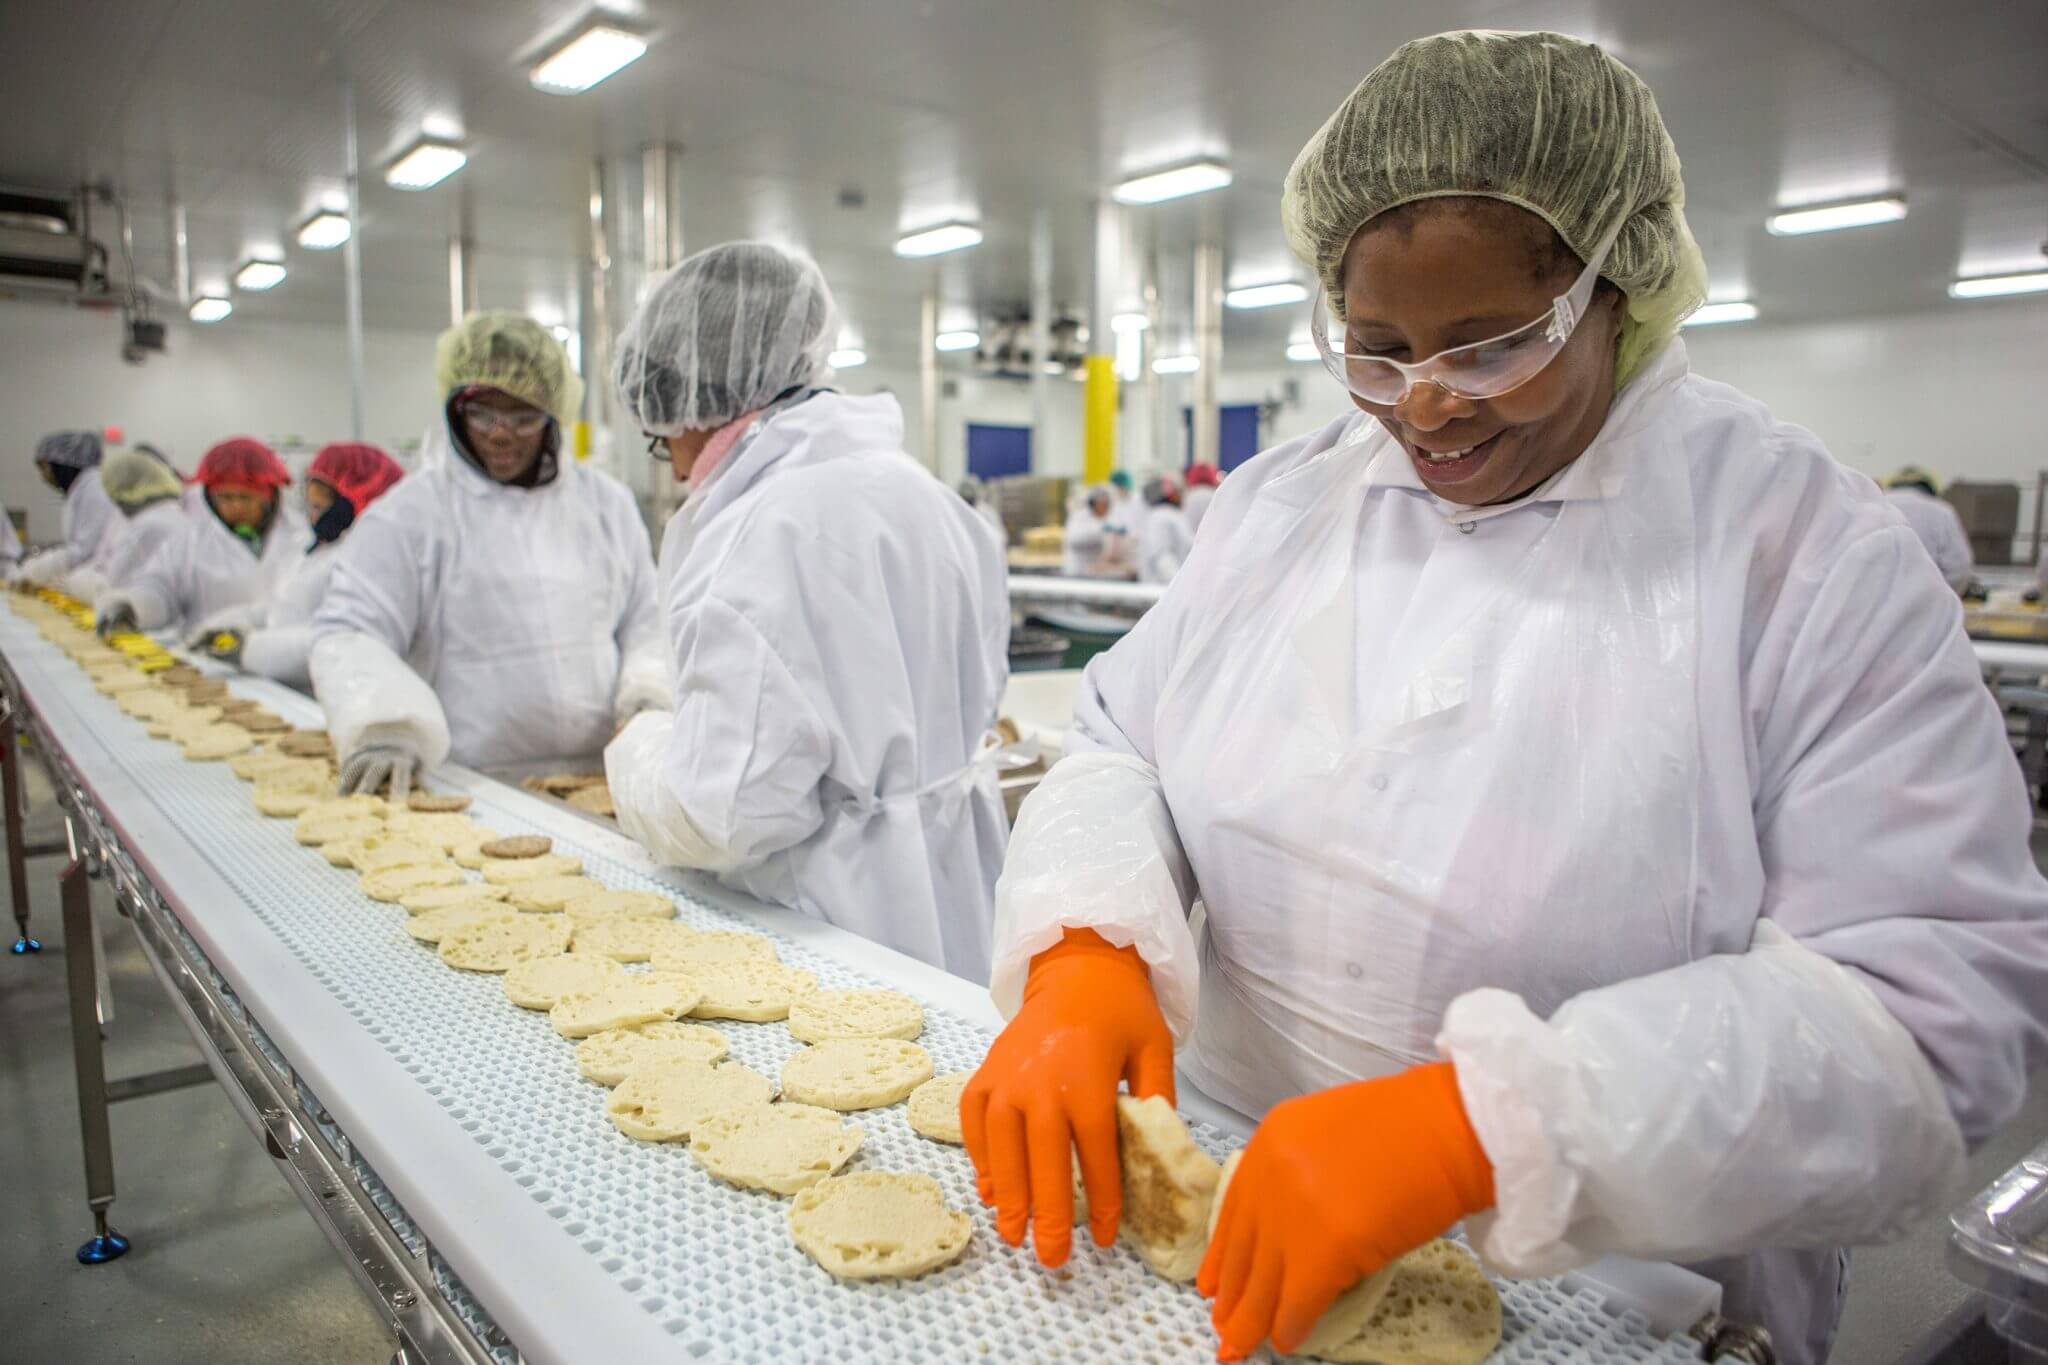 The food industry continues to lead in Brazil, with an increase in its relevance in the last decade.